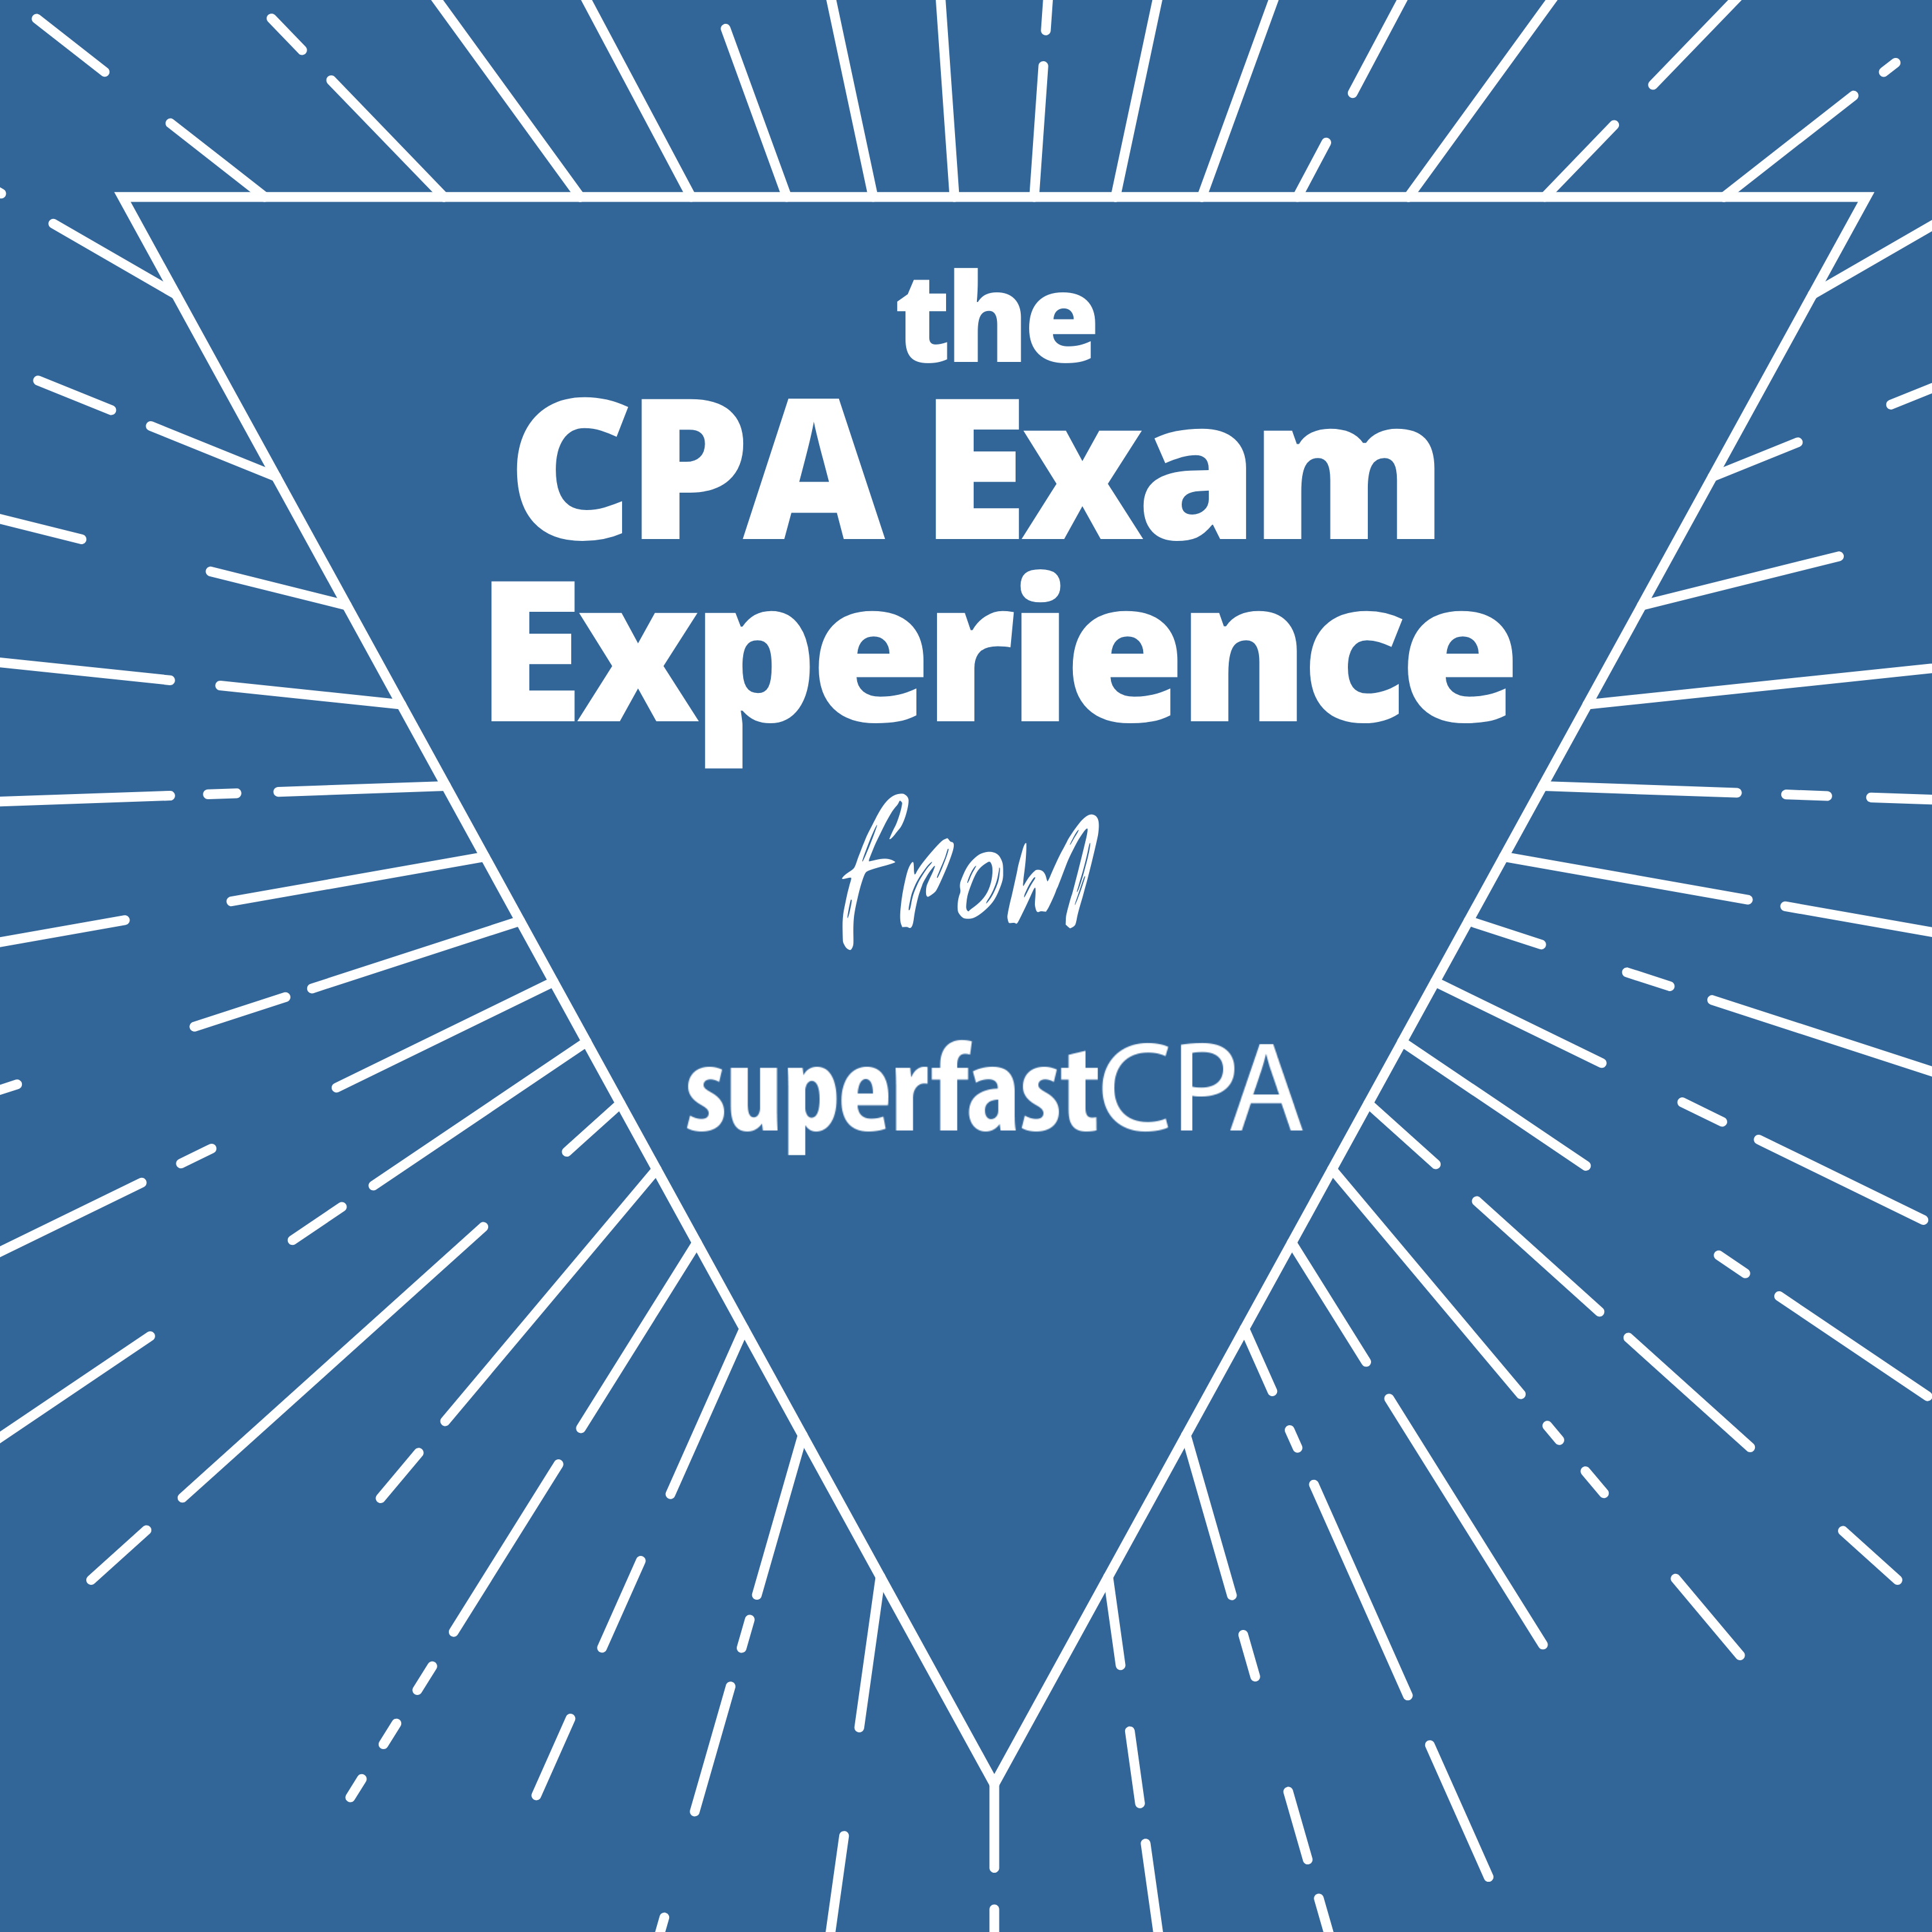 Artwork for CPA Exam Experience from SuperfastCPA